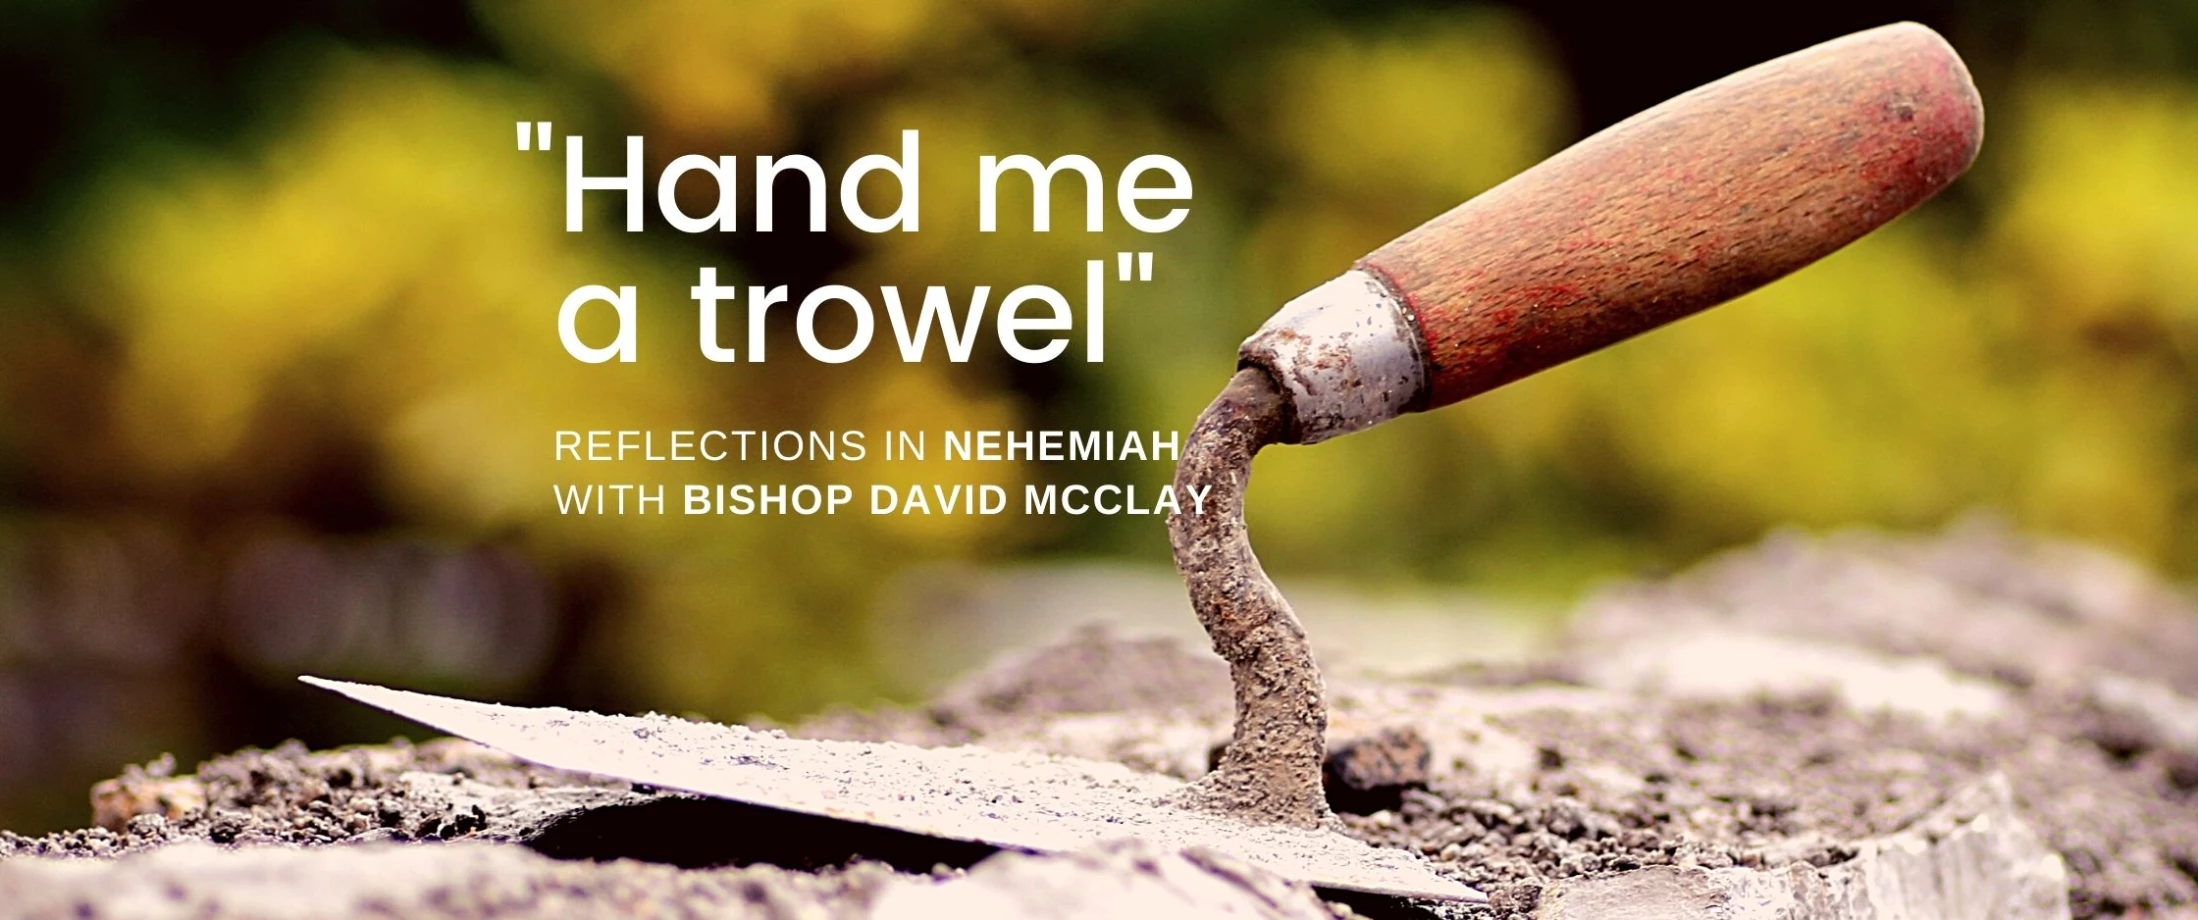 Reflections in Nehemiah for Lent Day 18